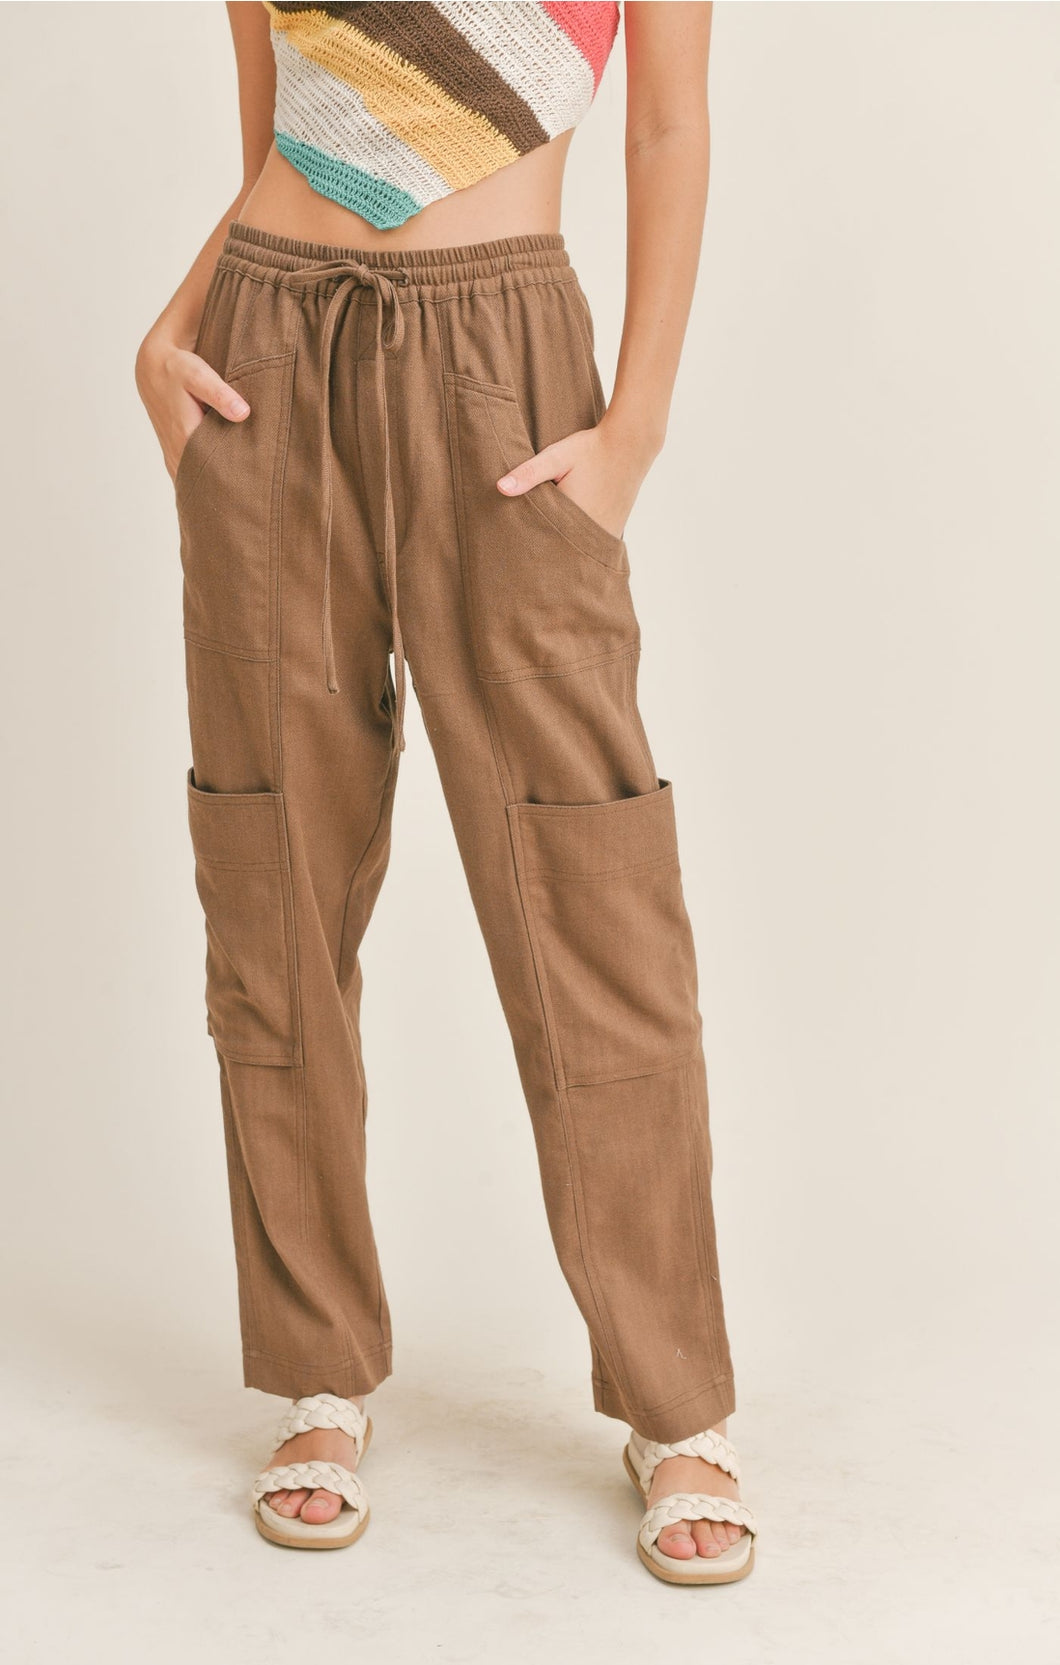 Sage The Label Jungle Girl Cargo Pants